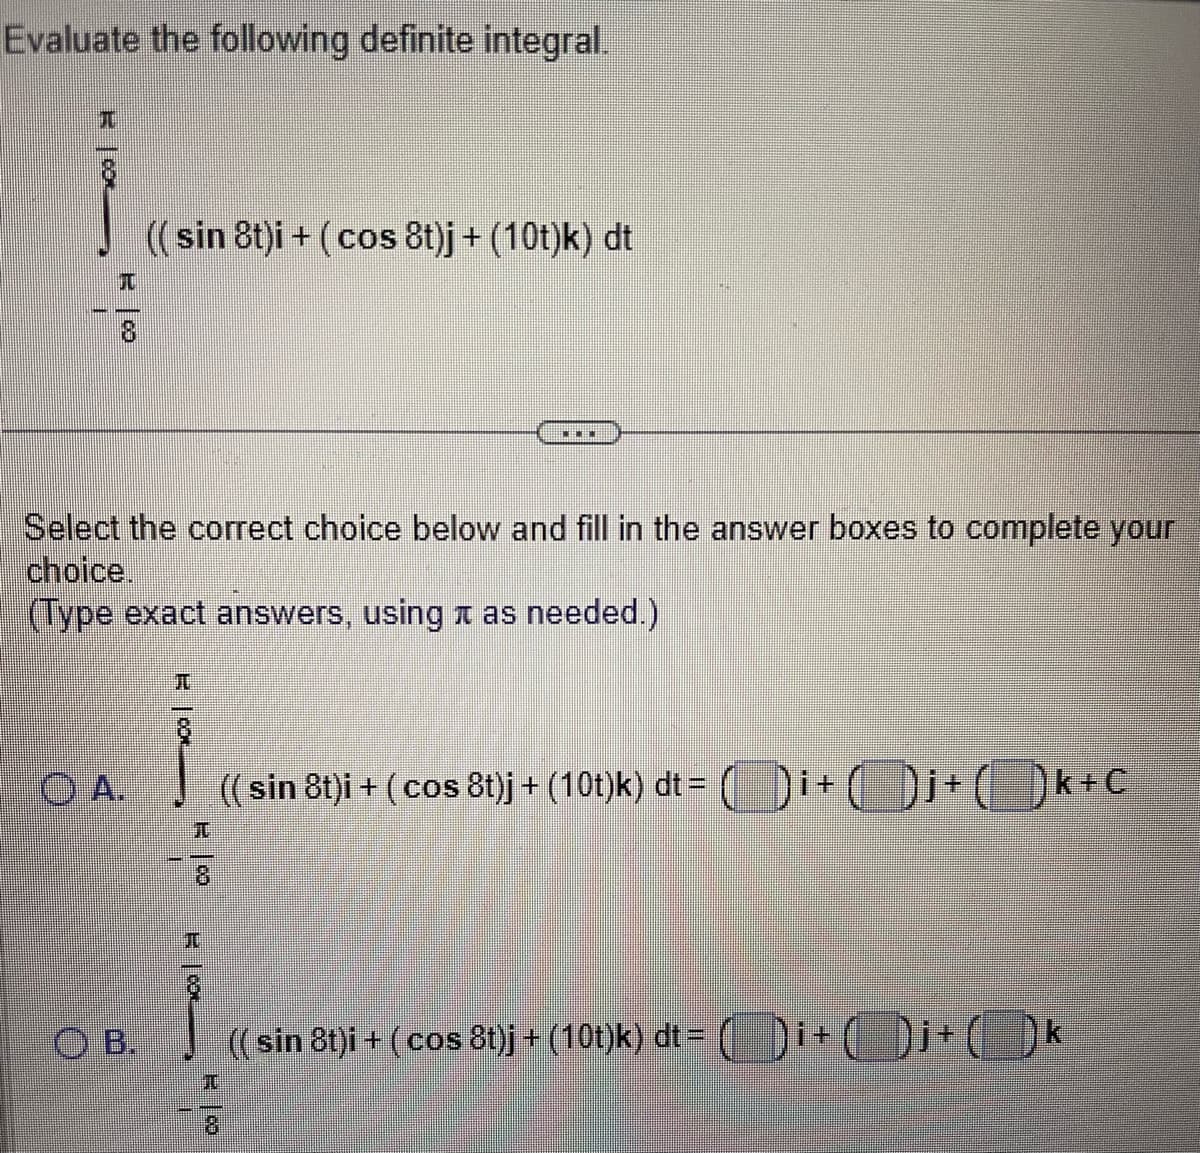 Evaluate the following definite integral.
T
10
(( sin 8t)i + (cos 8t)j + (10t)k) dt
Select the correct choice below and fill in the answer boxes to complete your
choice.
(Type exact answers, using as needed.)
OB.
J
OA. (( sin 8t)i + (cos 8t)j + (10t)k) dt= i +()
I
POOL
JU
T
RO
8
(( sin 8t)i + (cos 8t)j + (10t)k) dt =
1+
+(k+C